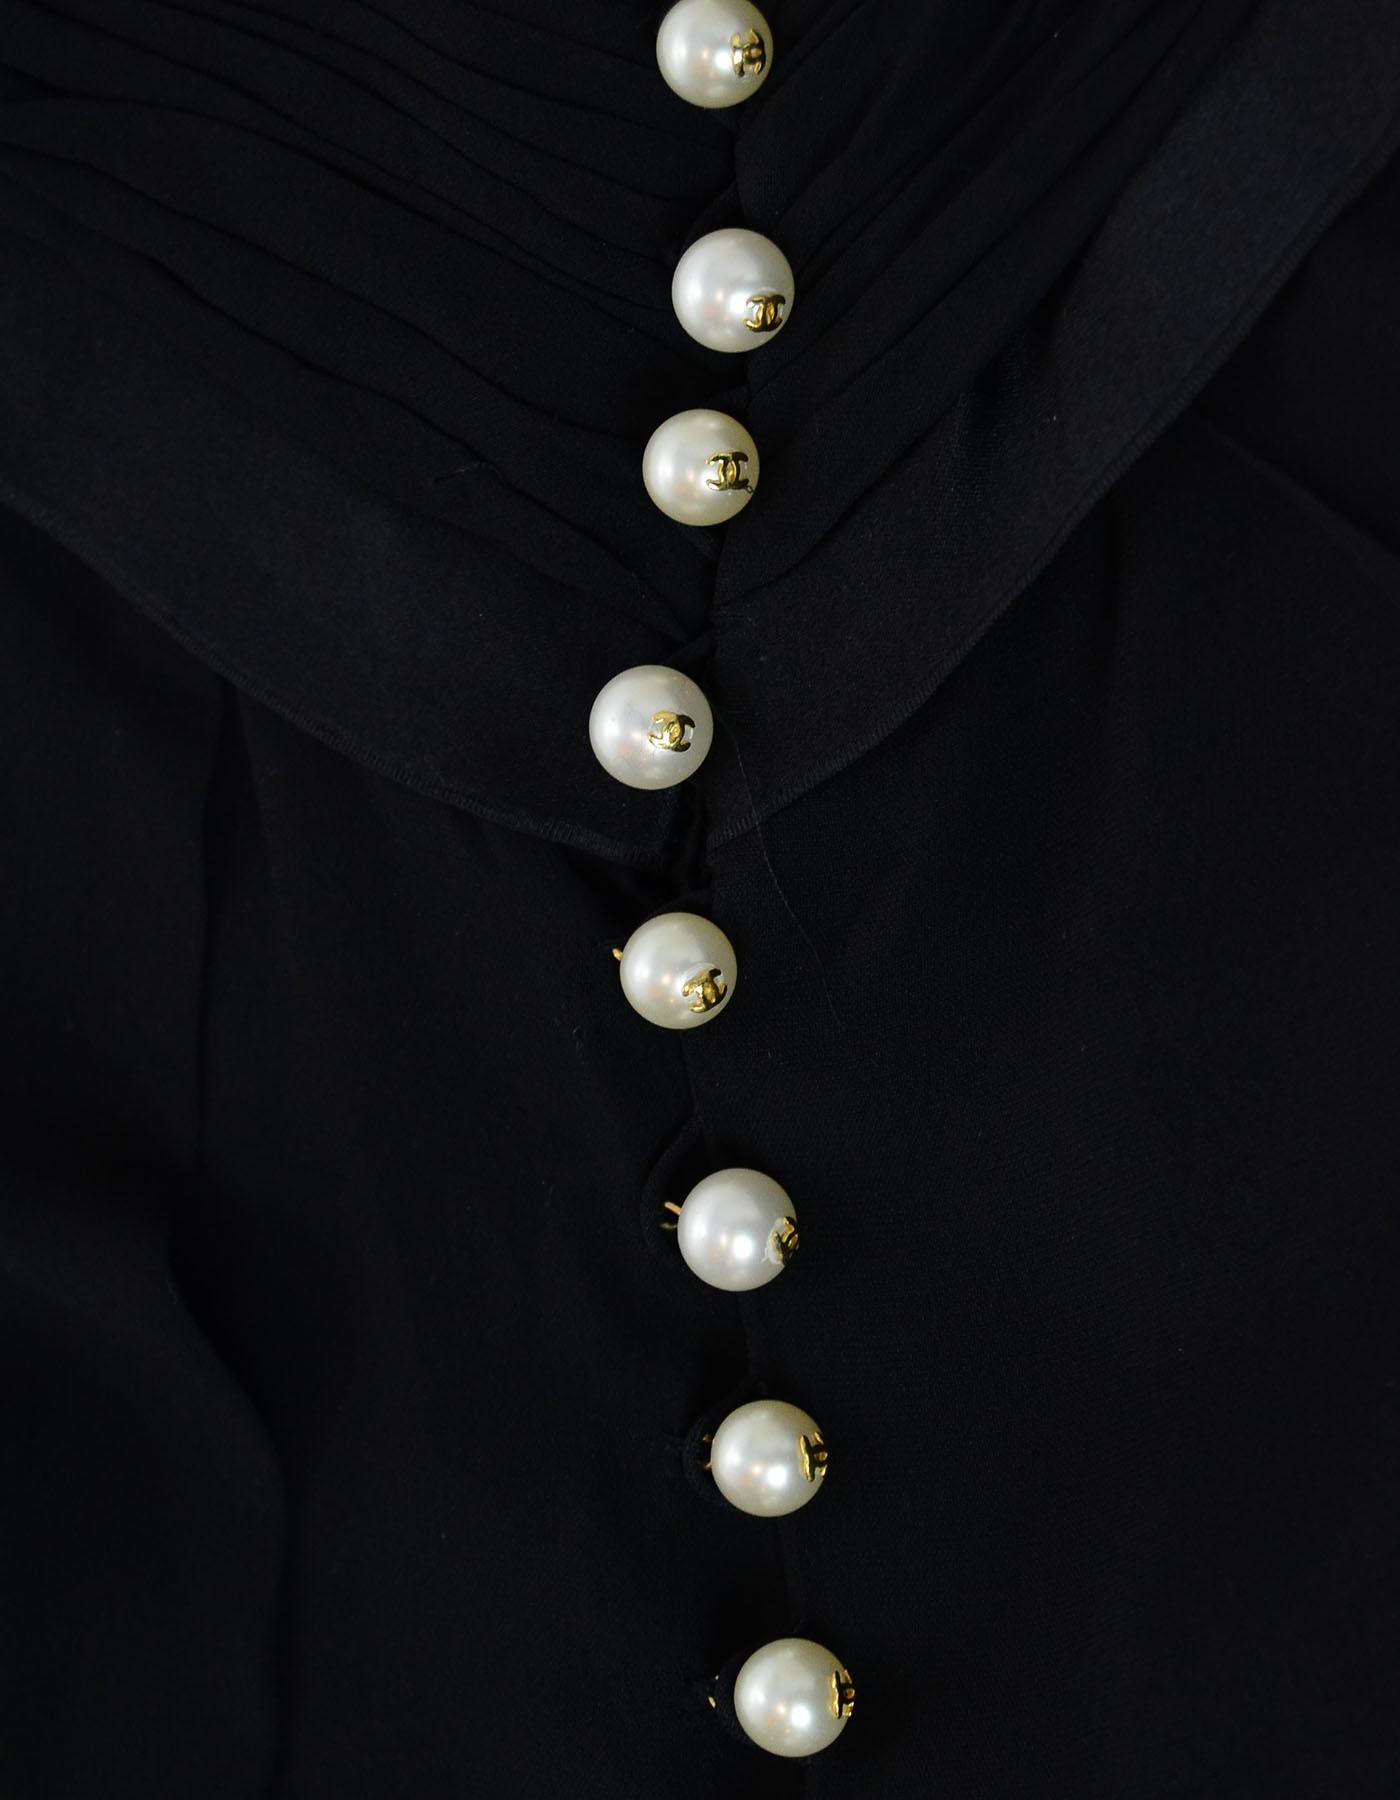 Chanel Black Silk Vintage Gown With Ruched Top and Side Bow W/ 13 CC Pearl Button Back Sz 38

Made In: France
Color: Black
Materials: 100% silk
Lining: 100% silk
Opening/Closure: 13 Chanel logo pearl buttons on back 
Overall Condition: Excellent